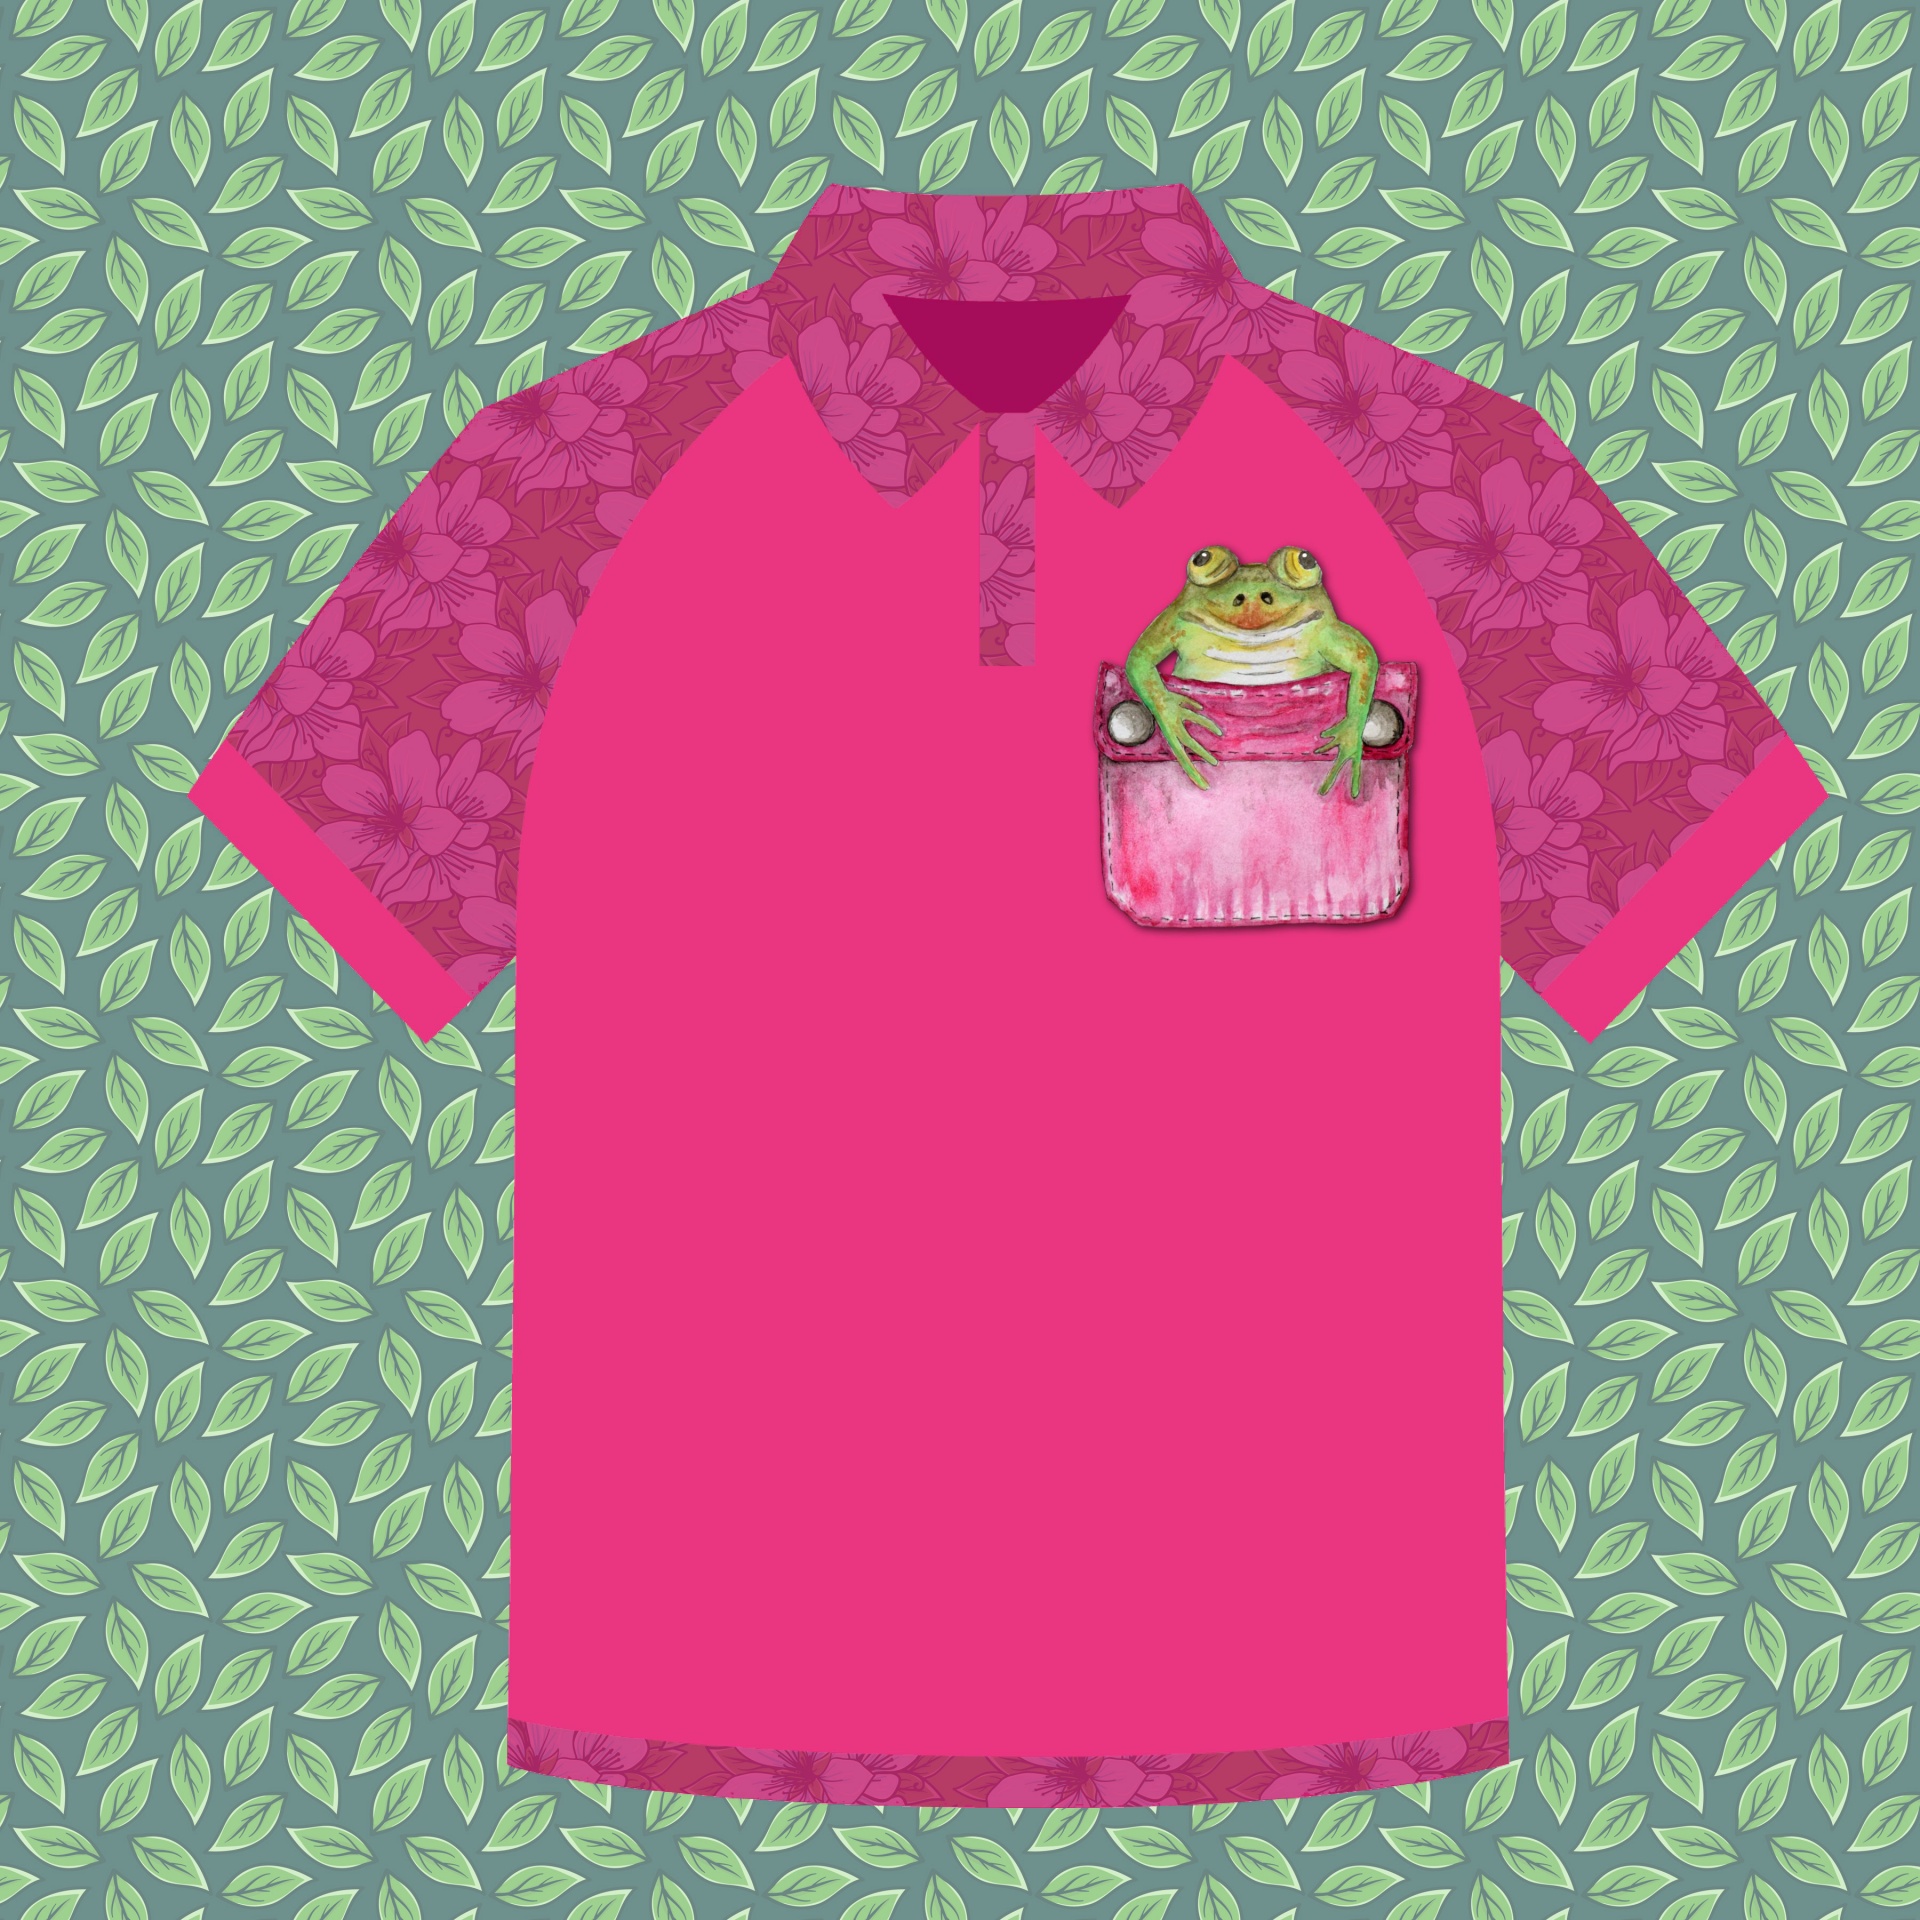 cartoon shirt illustration featuring the a cute frog in the shirt pocket